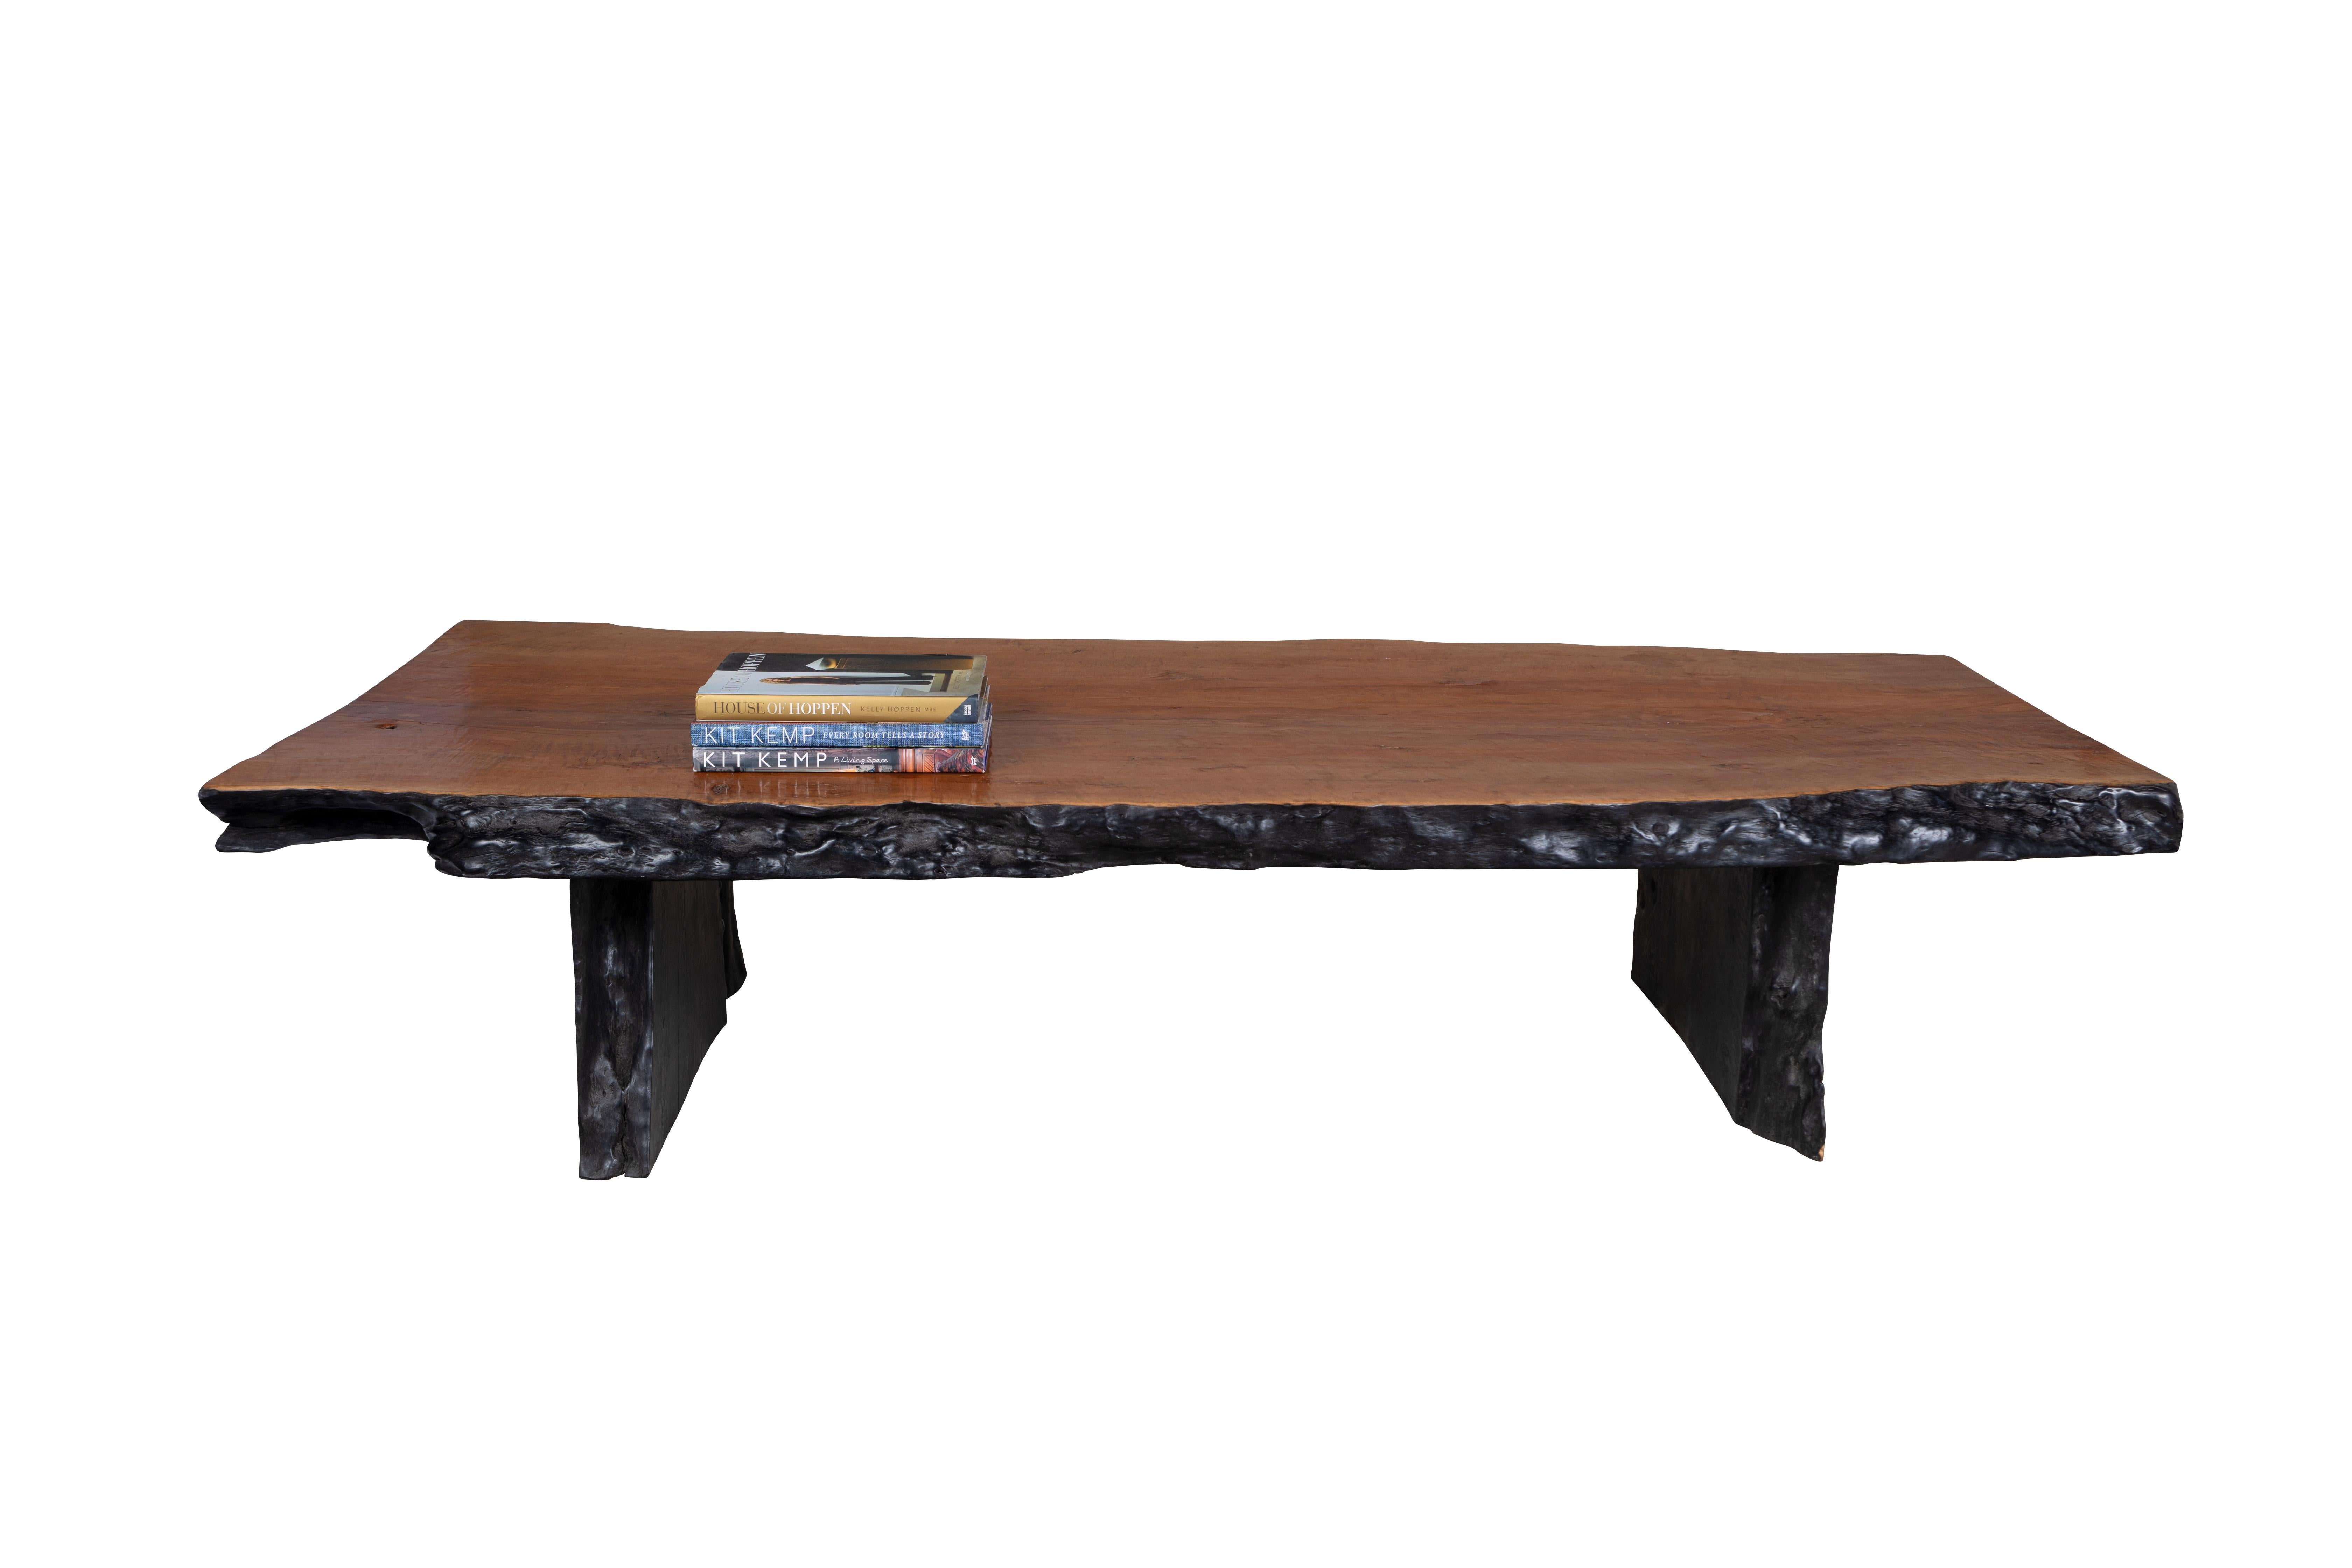 This coffee table is built from one single piece of lychee hardwood. The top is flattened, sanded, and then stained to compliment the wood's naturally rich texture and rustic patterns. The sides are kept in their natural organic shape and then